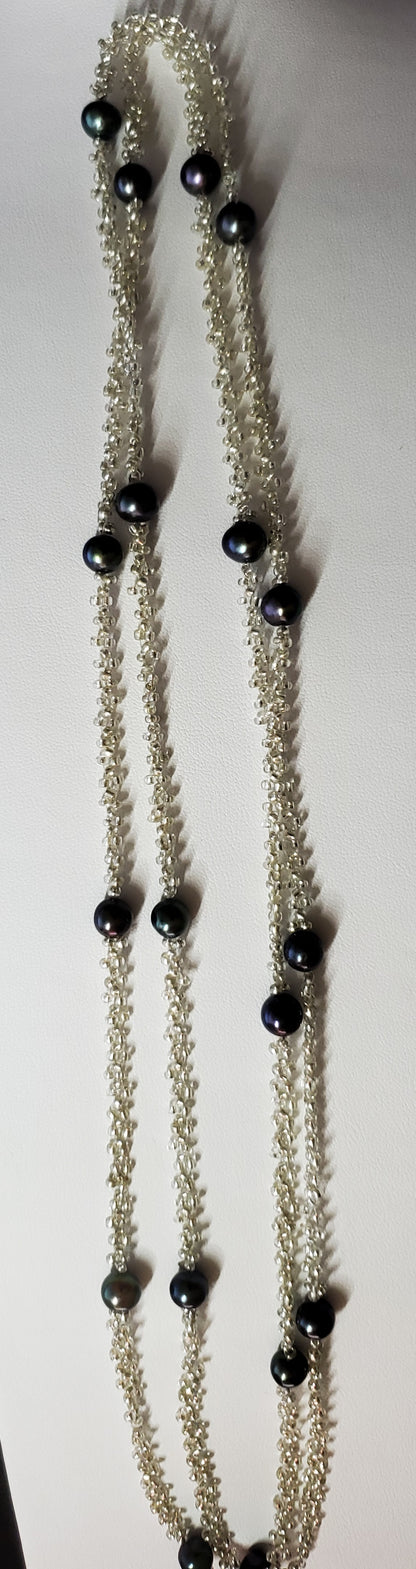 Handmade Silver Beaded Pacific Black Pearl Wrap Around Necklace